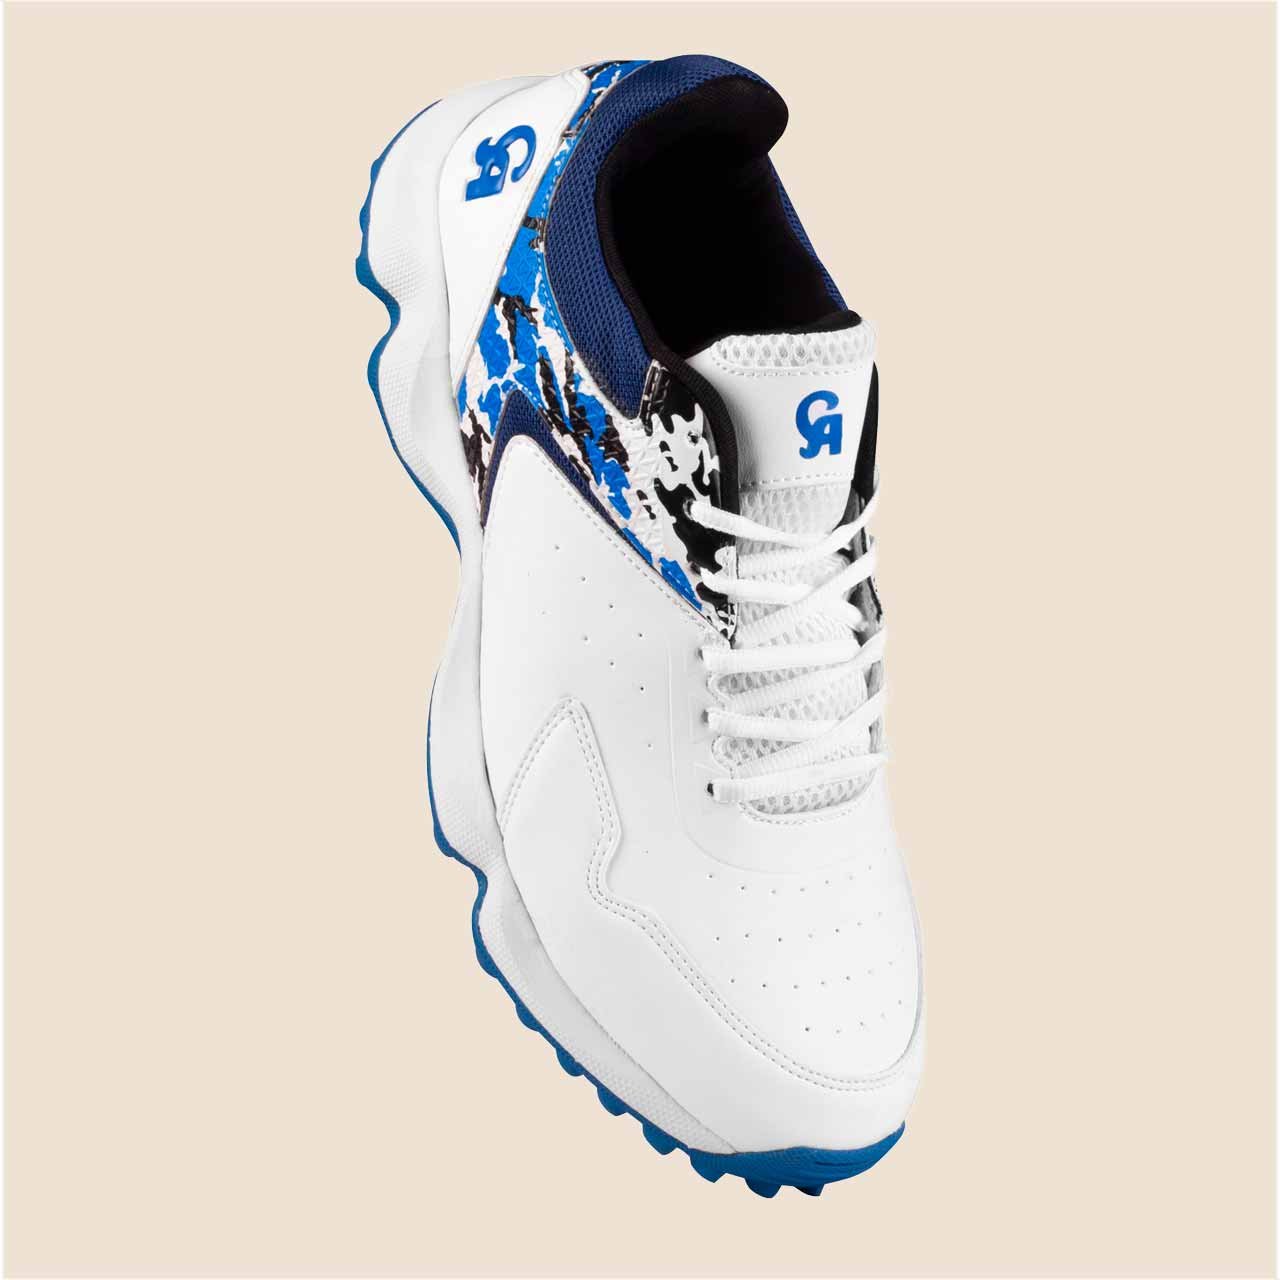 CA R1 CAMO SHOES (BLUE) ca sports shoes best for walking playing and regular uses by xtremesportswear.com.pk